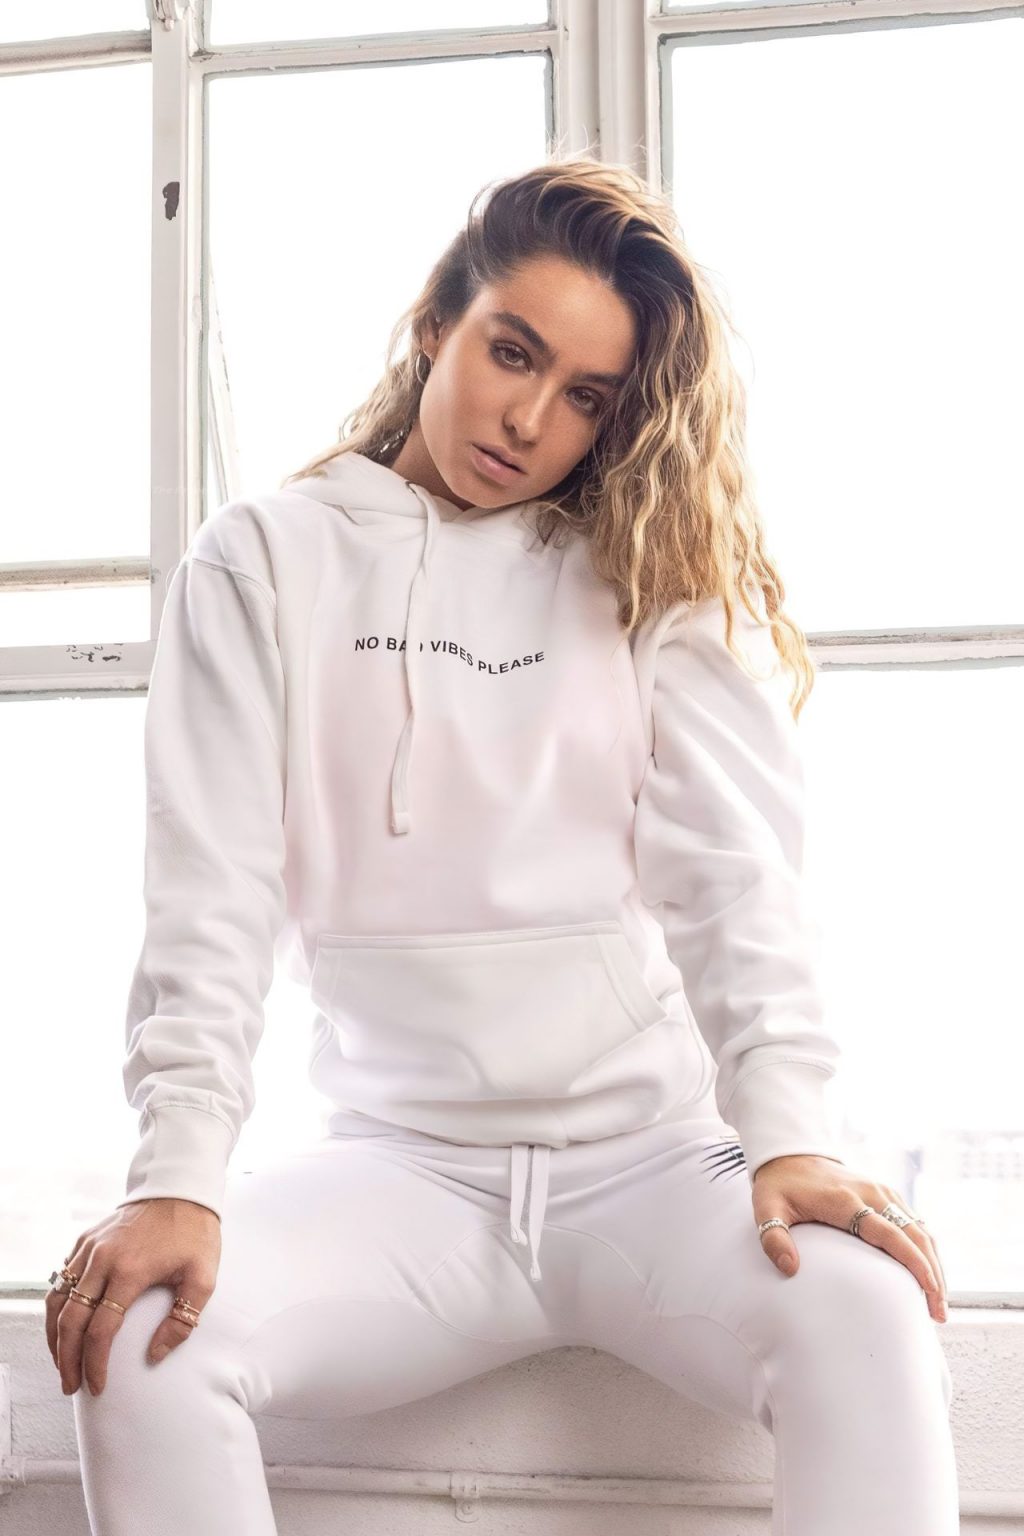 Sommer Ray Promotes Her Activewear (119 Photos)